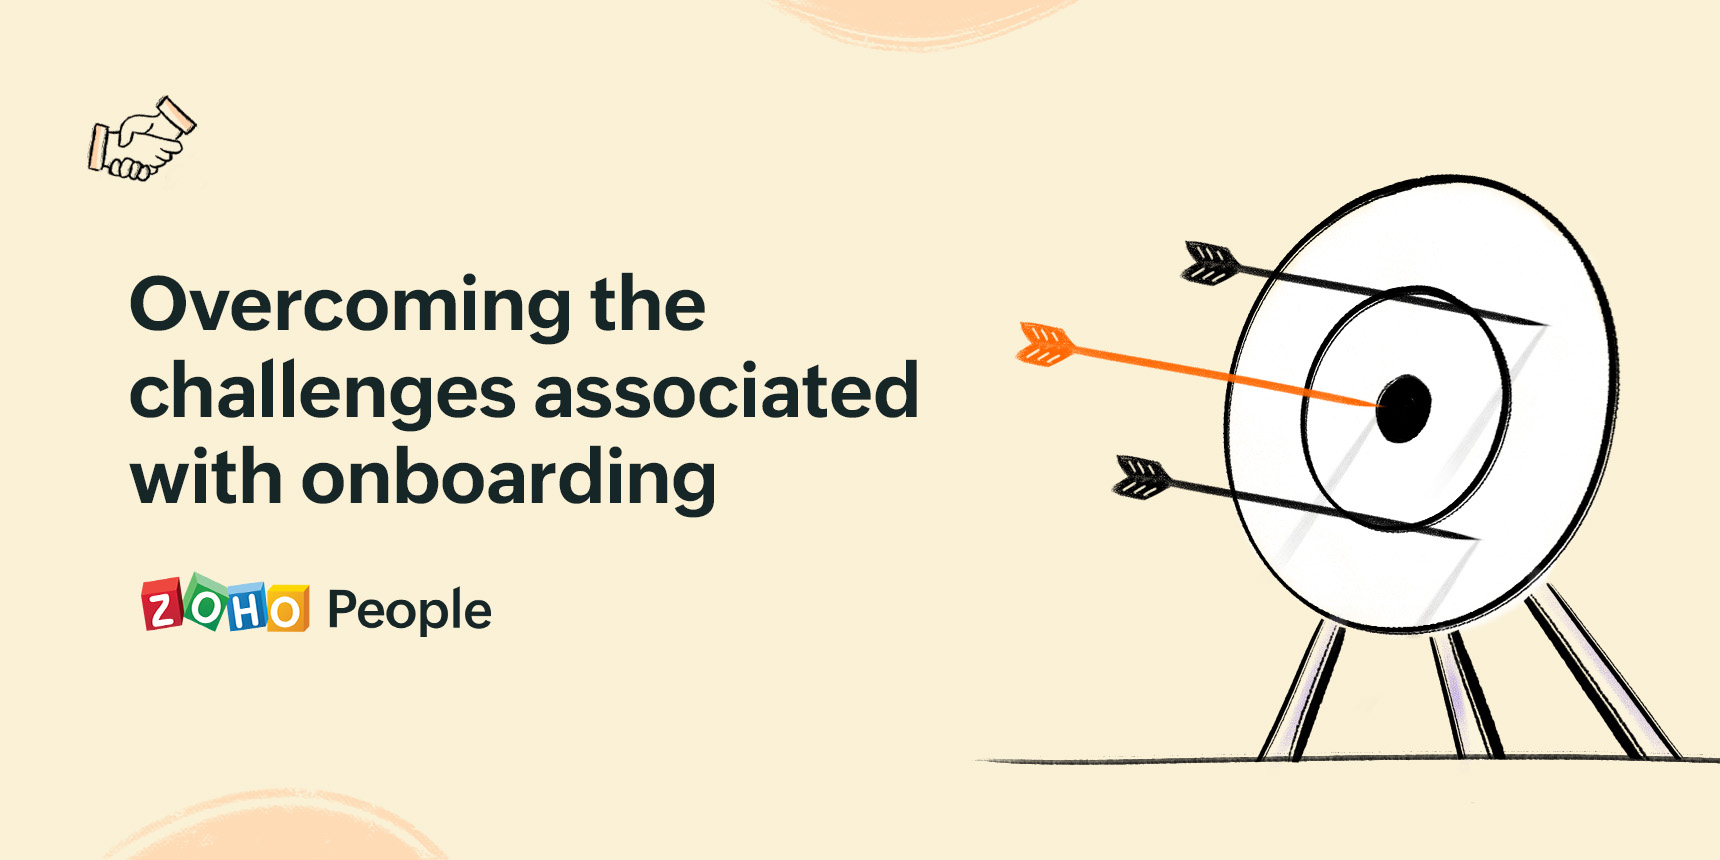 Overcoming the challenges associated with onboarding